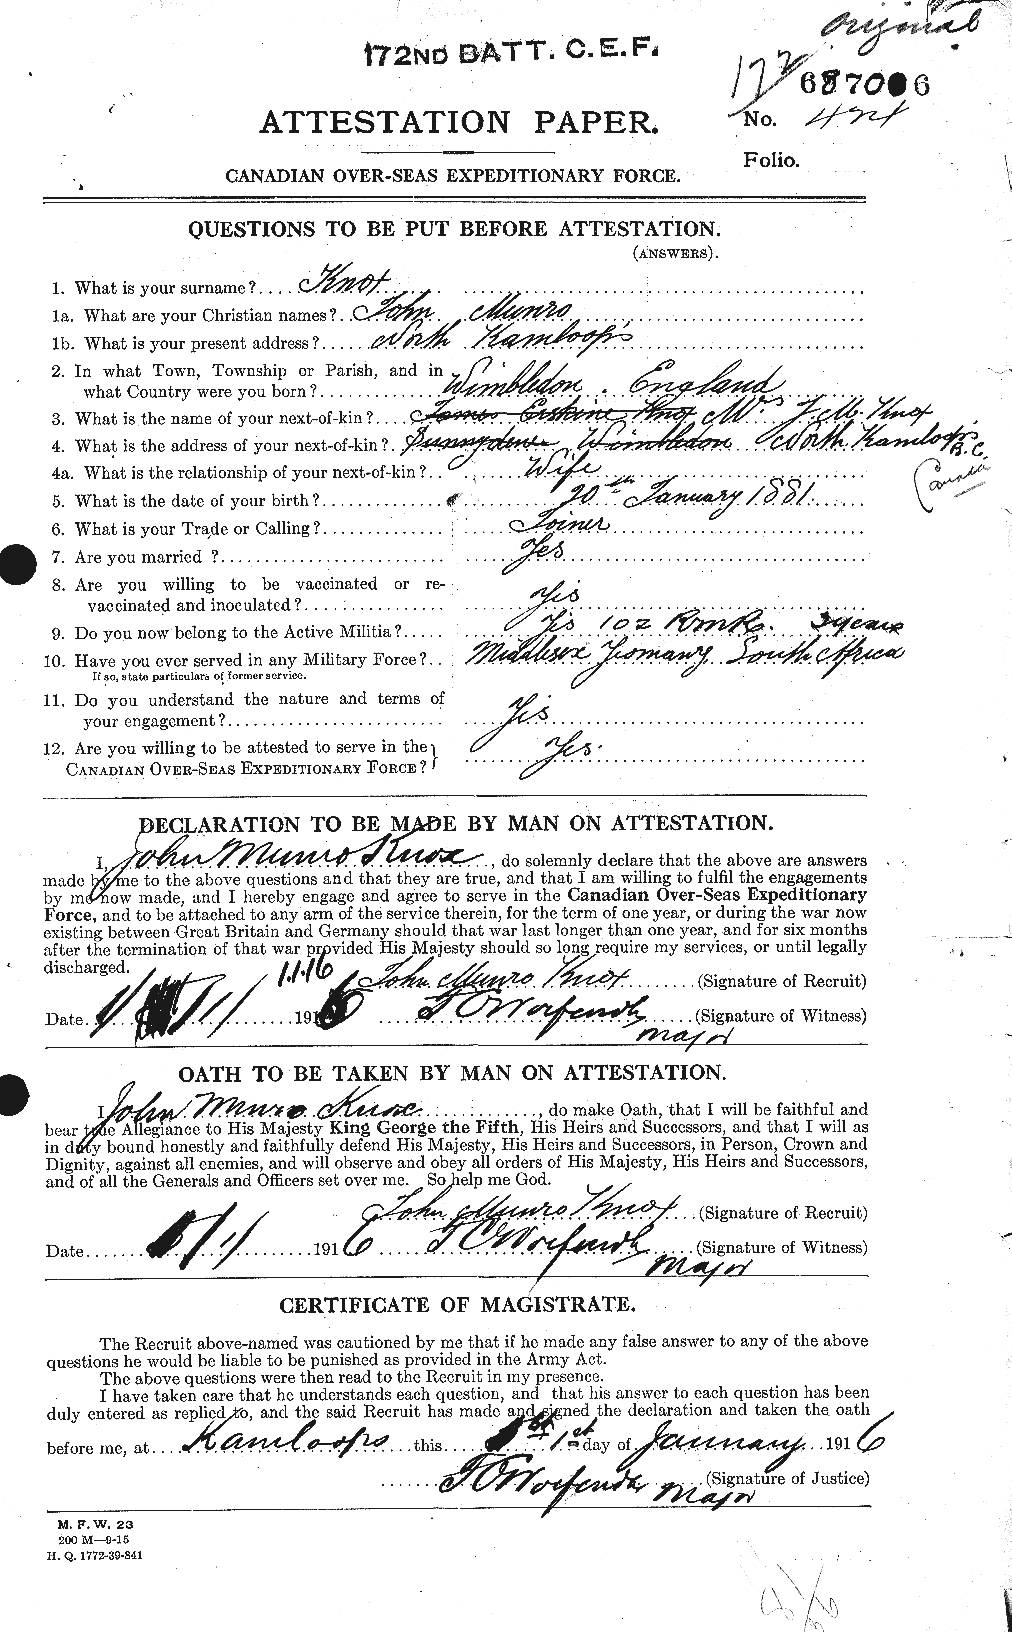 Personnel Records of the First World War - CEF 442869a